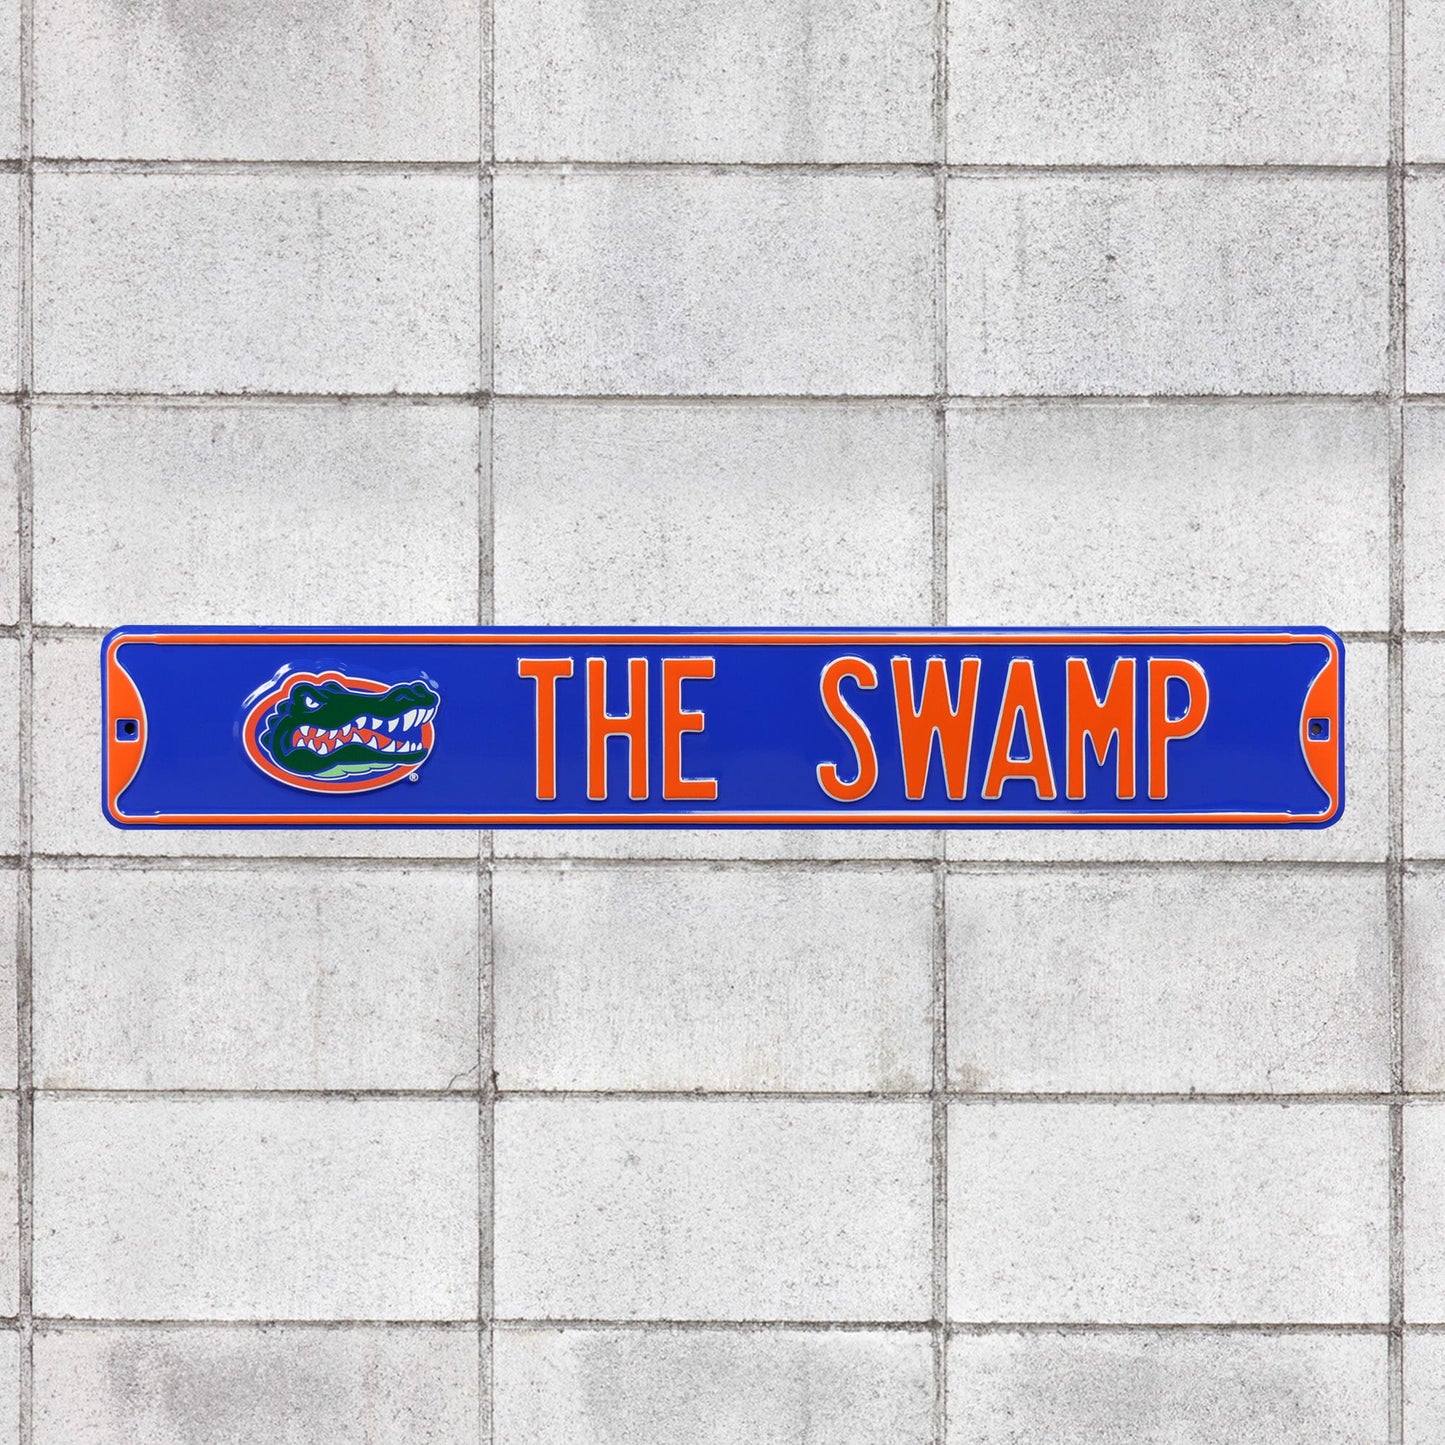 Florida Gators: The Swamp - Officially Licensed Metal Street Sign